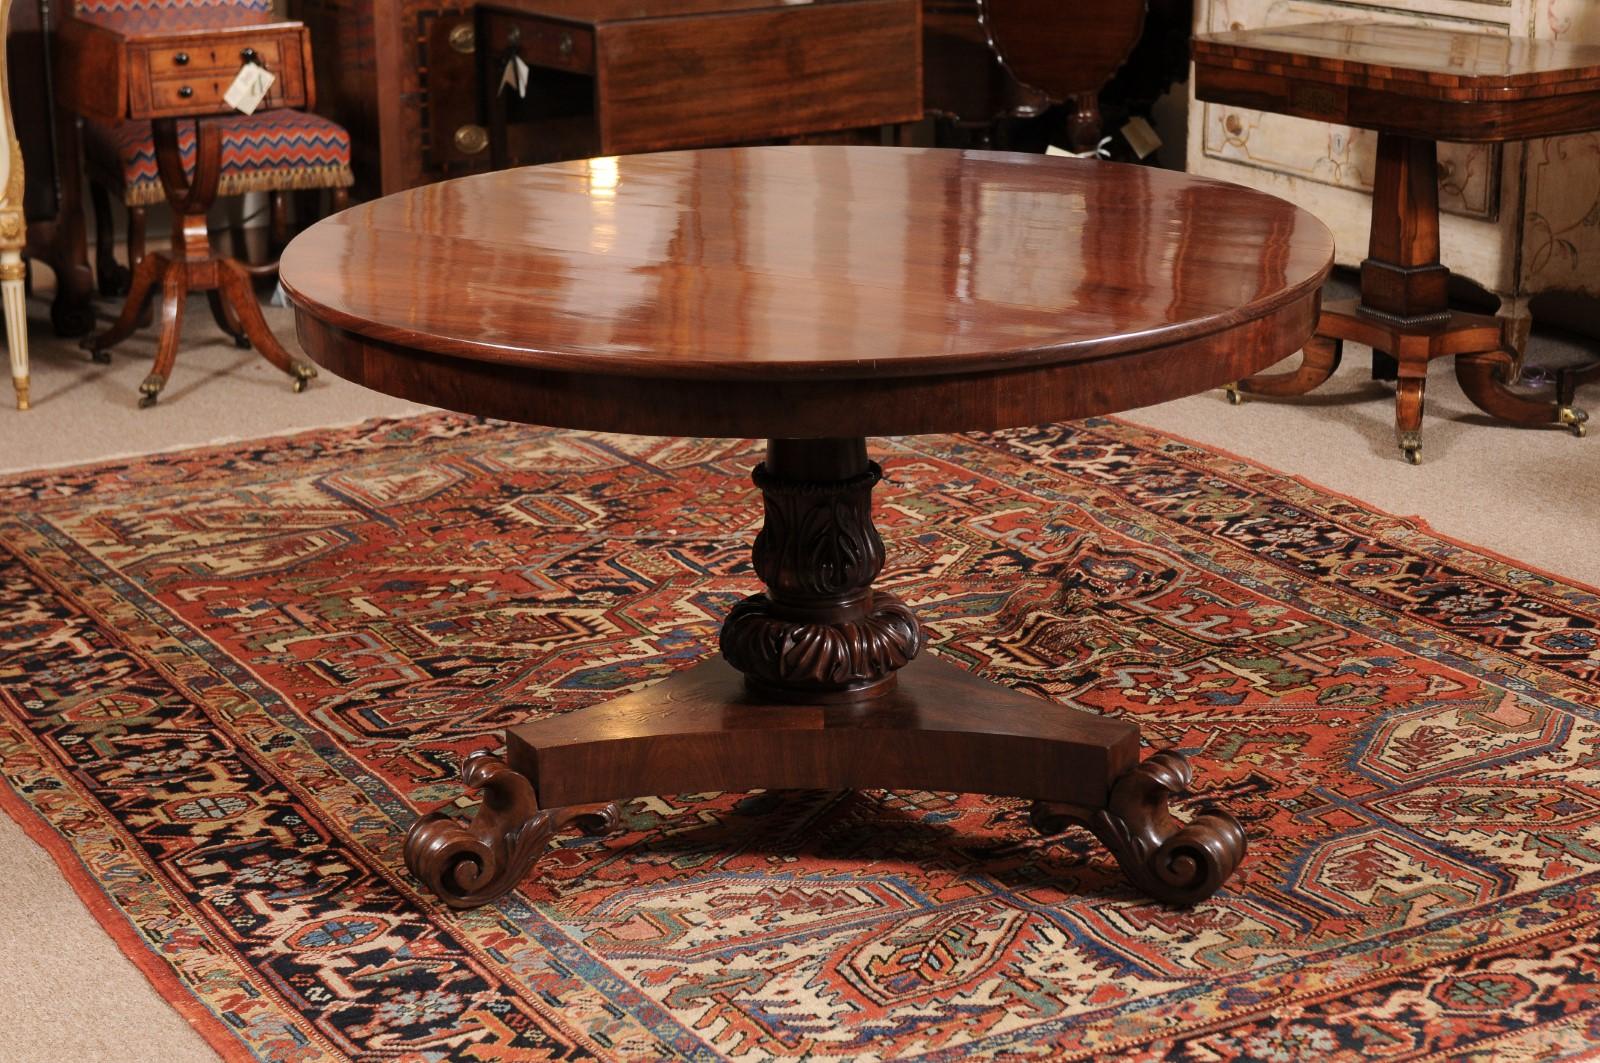  19th Century English Mahogany Center Table with Pedestal Base & Scroll Feet For Sale 7